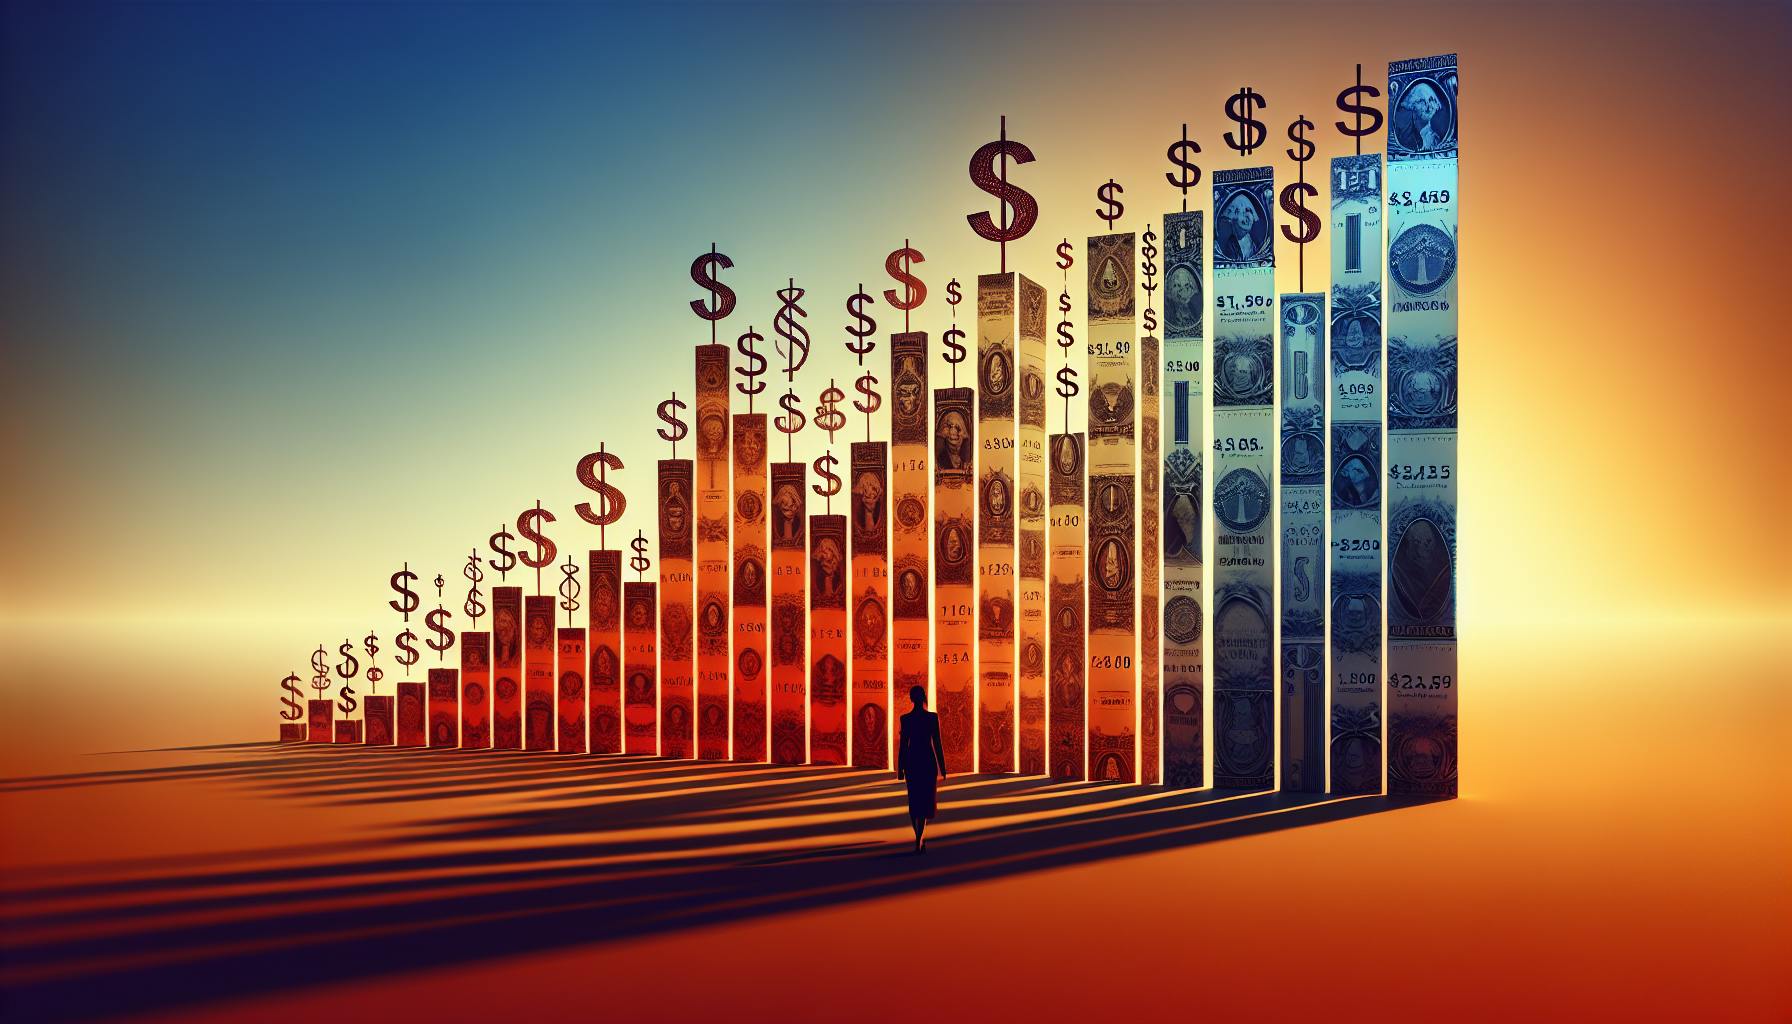 Financial Analyst Salary: A Look at Industry-Wide Salary Trends